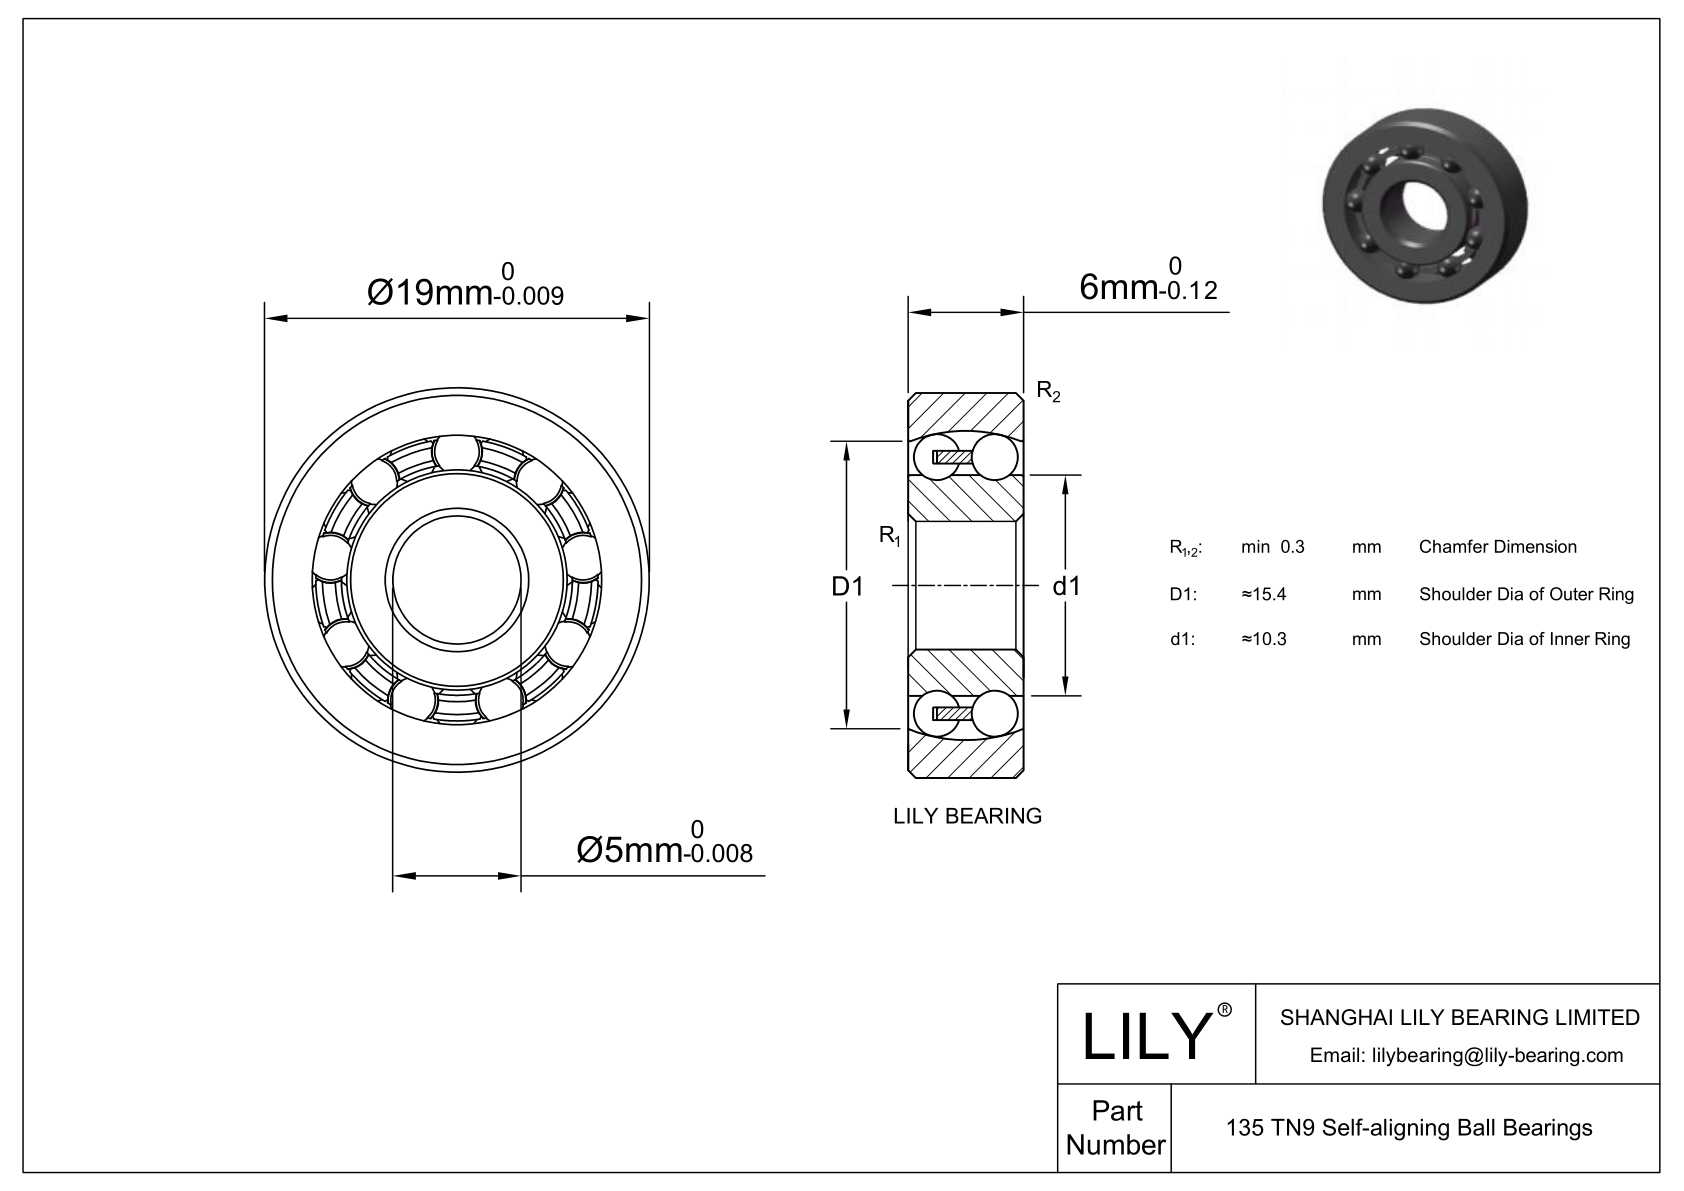 CE135SC Silicon Carbide Self Aligning Ball Bearings cad drawing